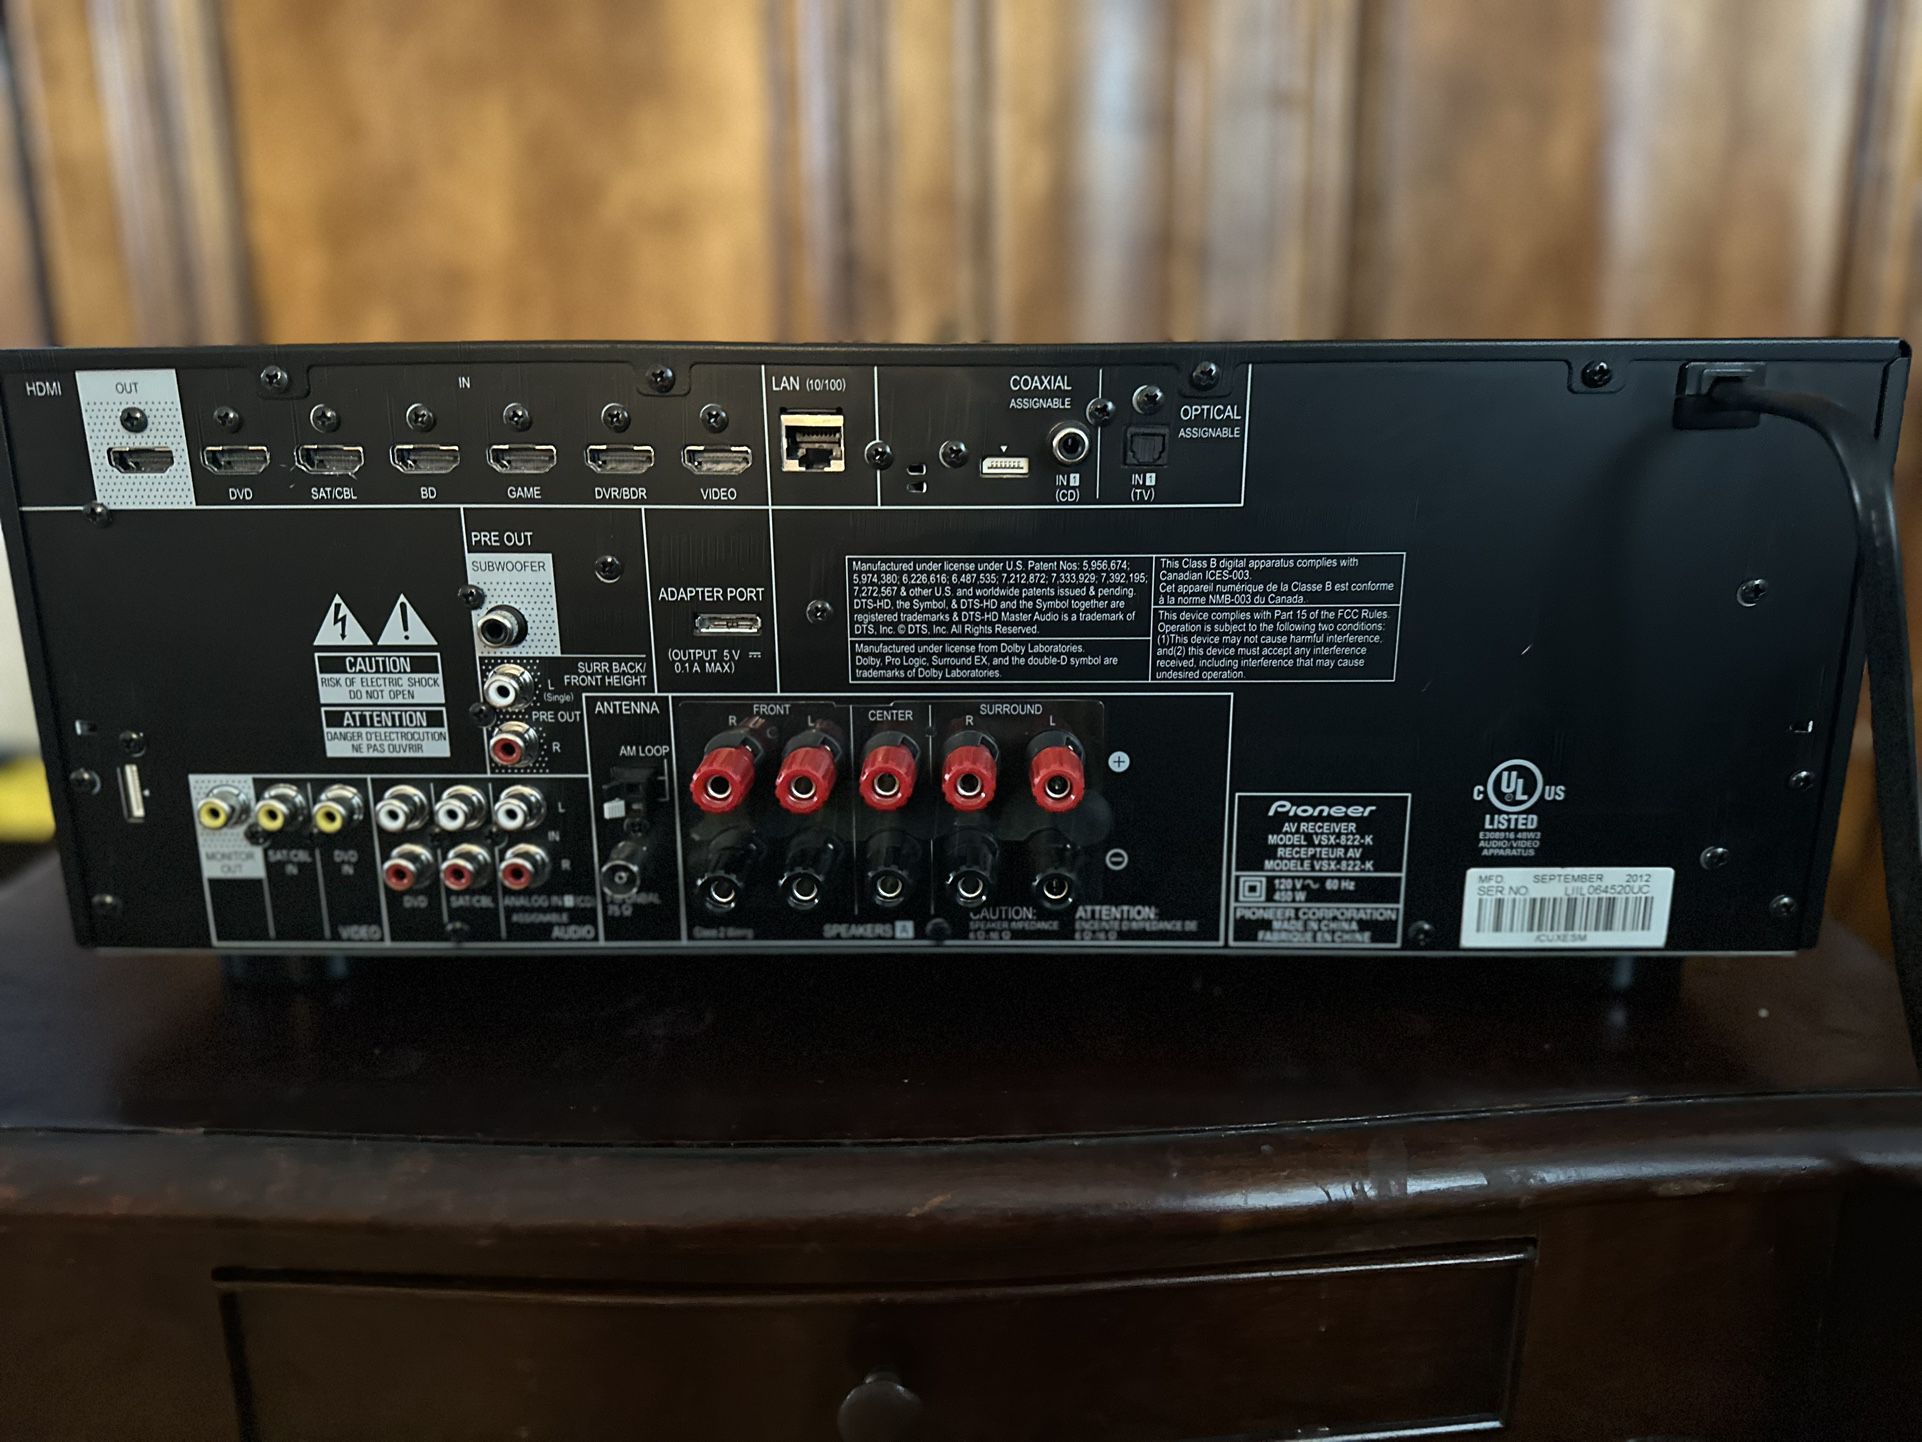 Pioneer VSX-822-K 5.1 Channel 140W Per Channel Receiver  With Speakers 